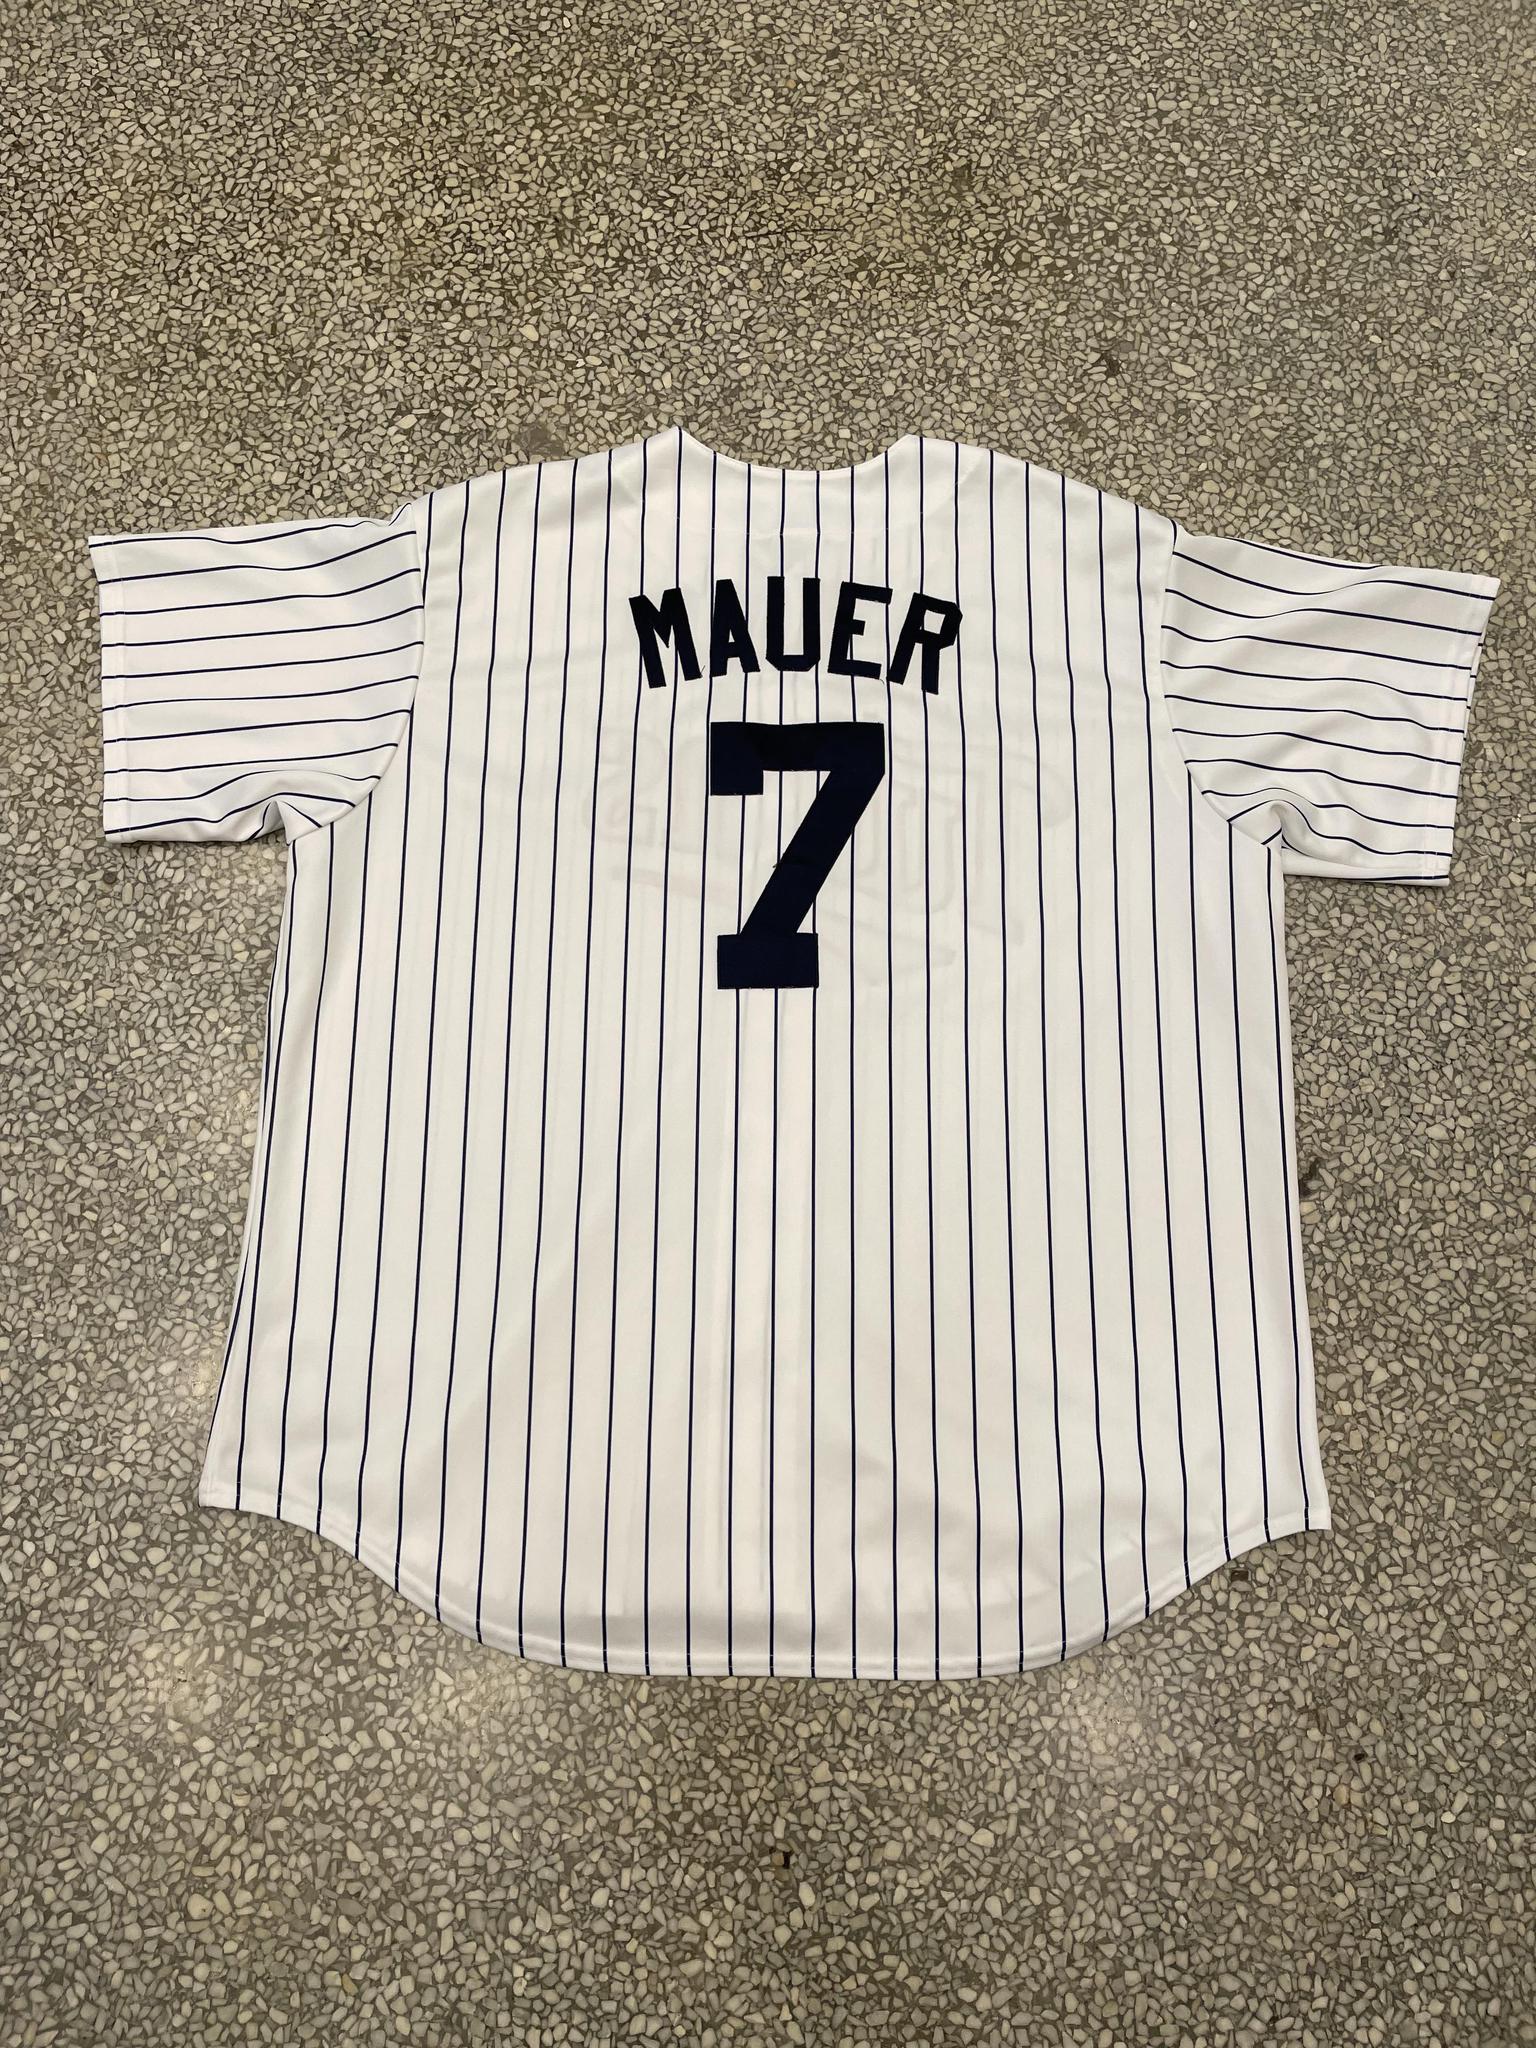 Men's Size XL Minnesota Twins Joe Mauer Jersey MLB Genuine Merchandise -  clothing & accessories - by owner - apparel